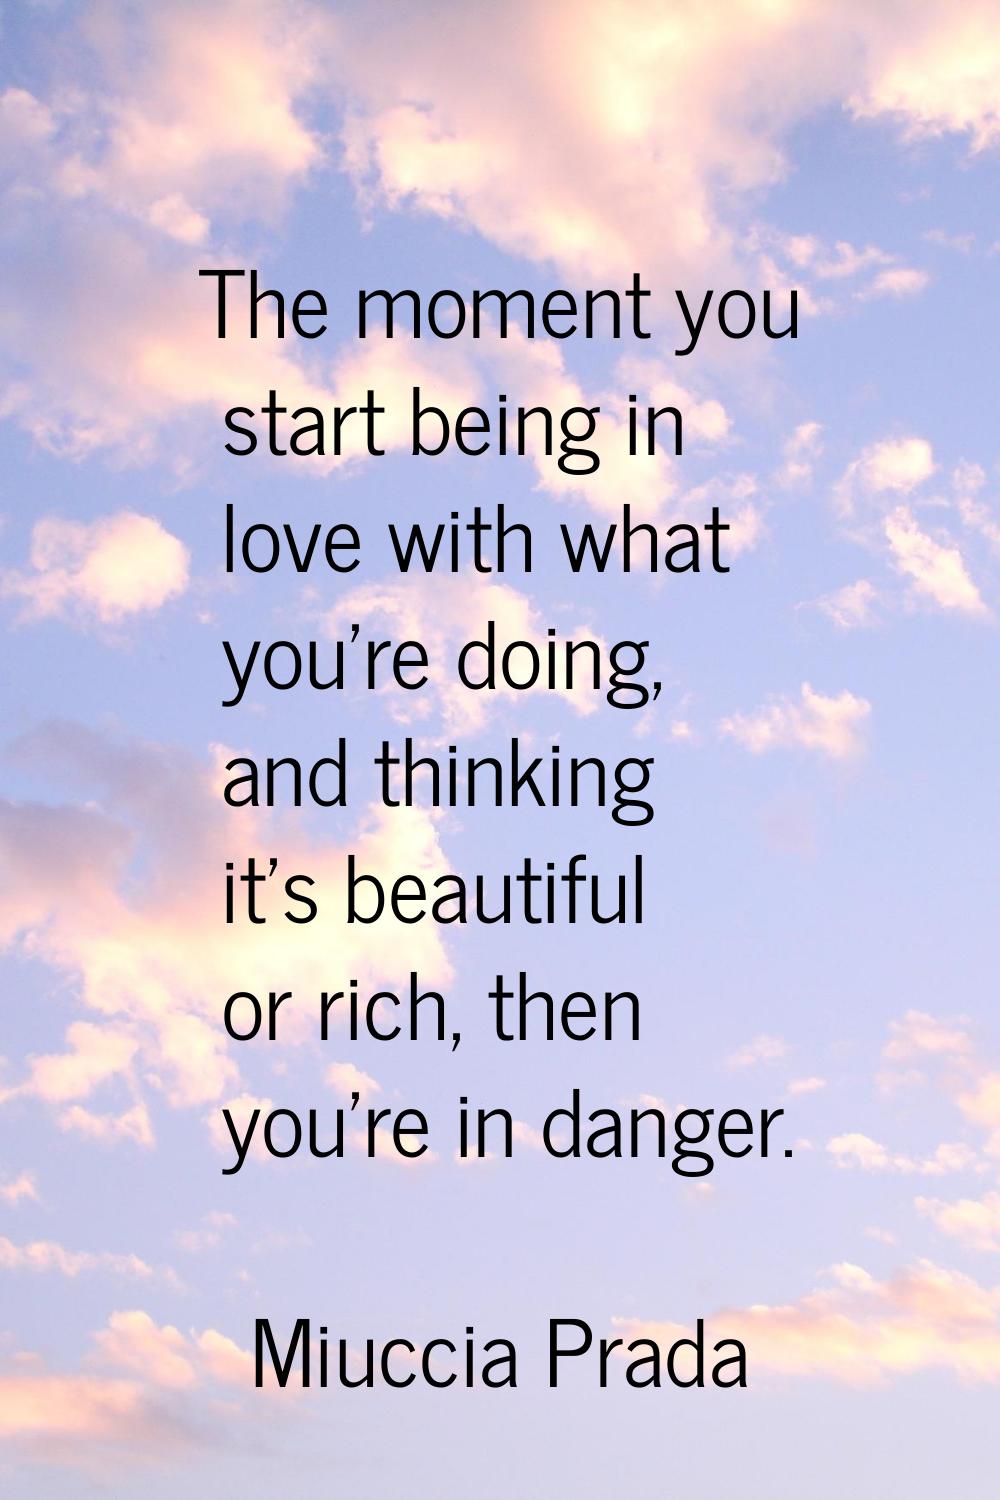 The moment you start being in love with what you're doing, and thinking it's beautiful or rich, the